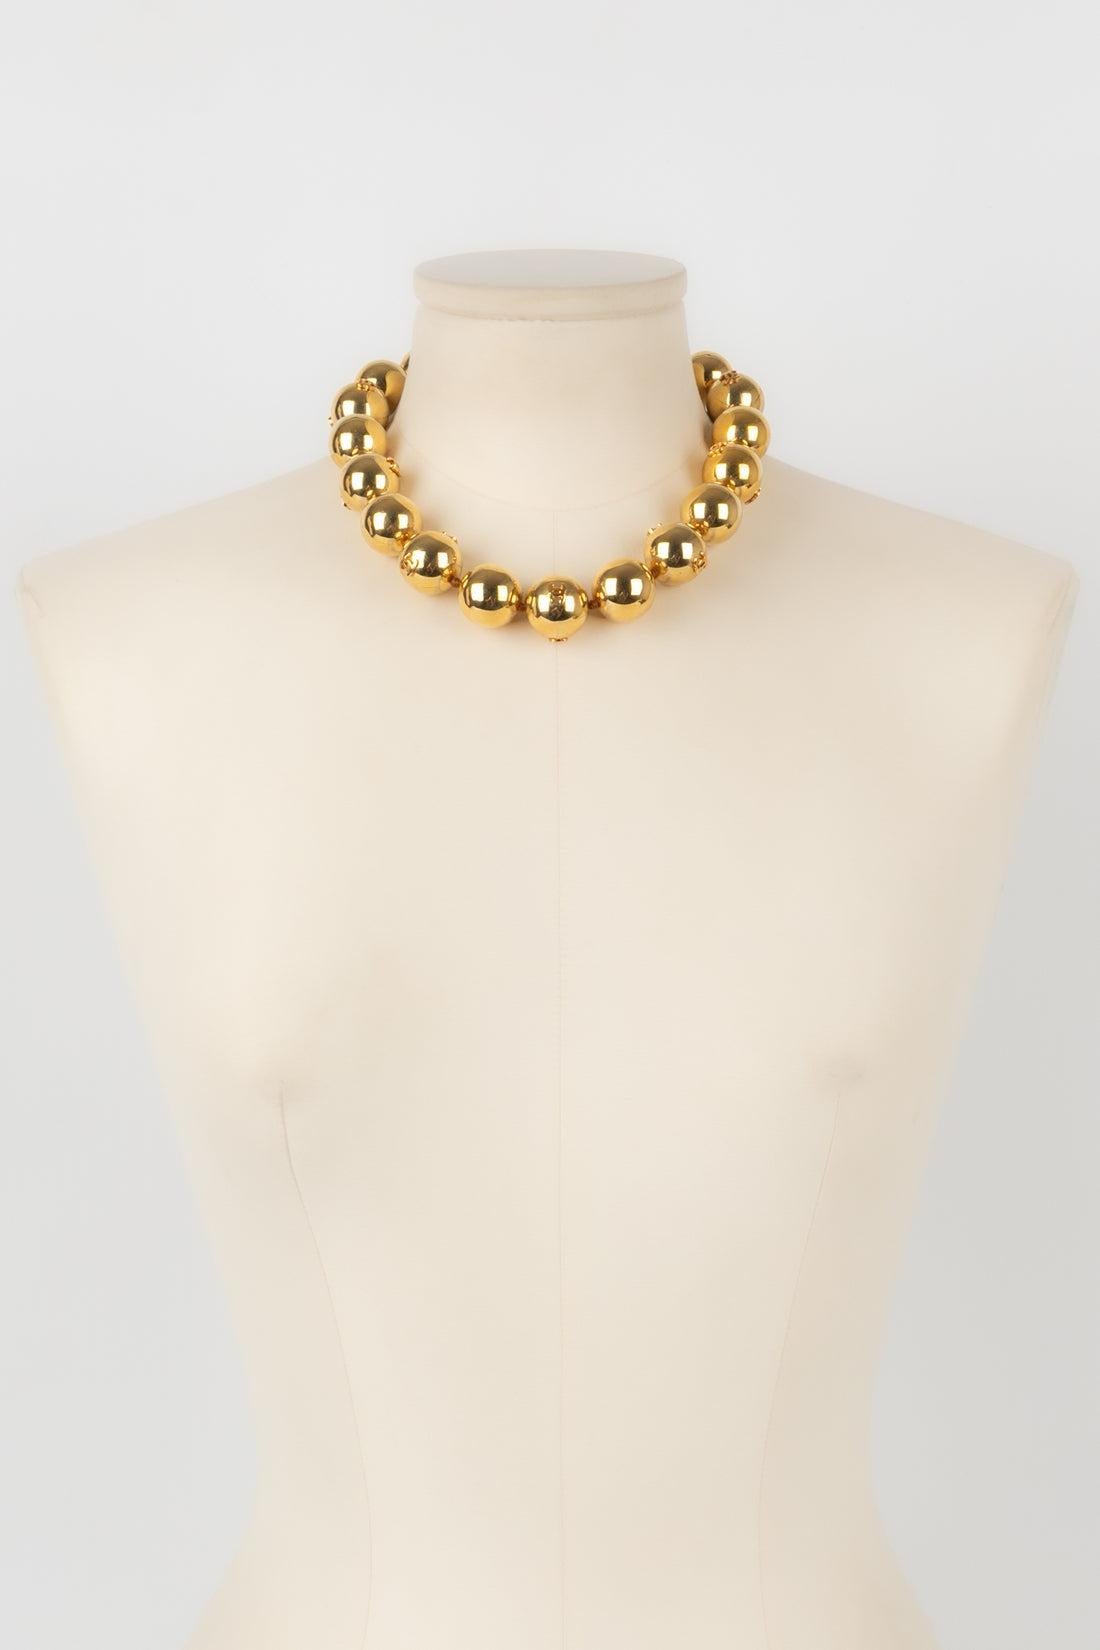 Chanel - (Made in France) short golden pearl necklace. Jewelry from the end of the 1980s.

Additional information:
Condition: Very good condition
Dimensions: Length: from 42 cm to 47 cm
Period: 20th Century

Seller Reference: CB13